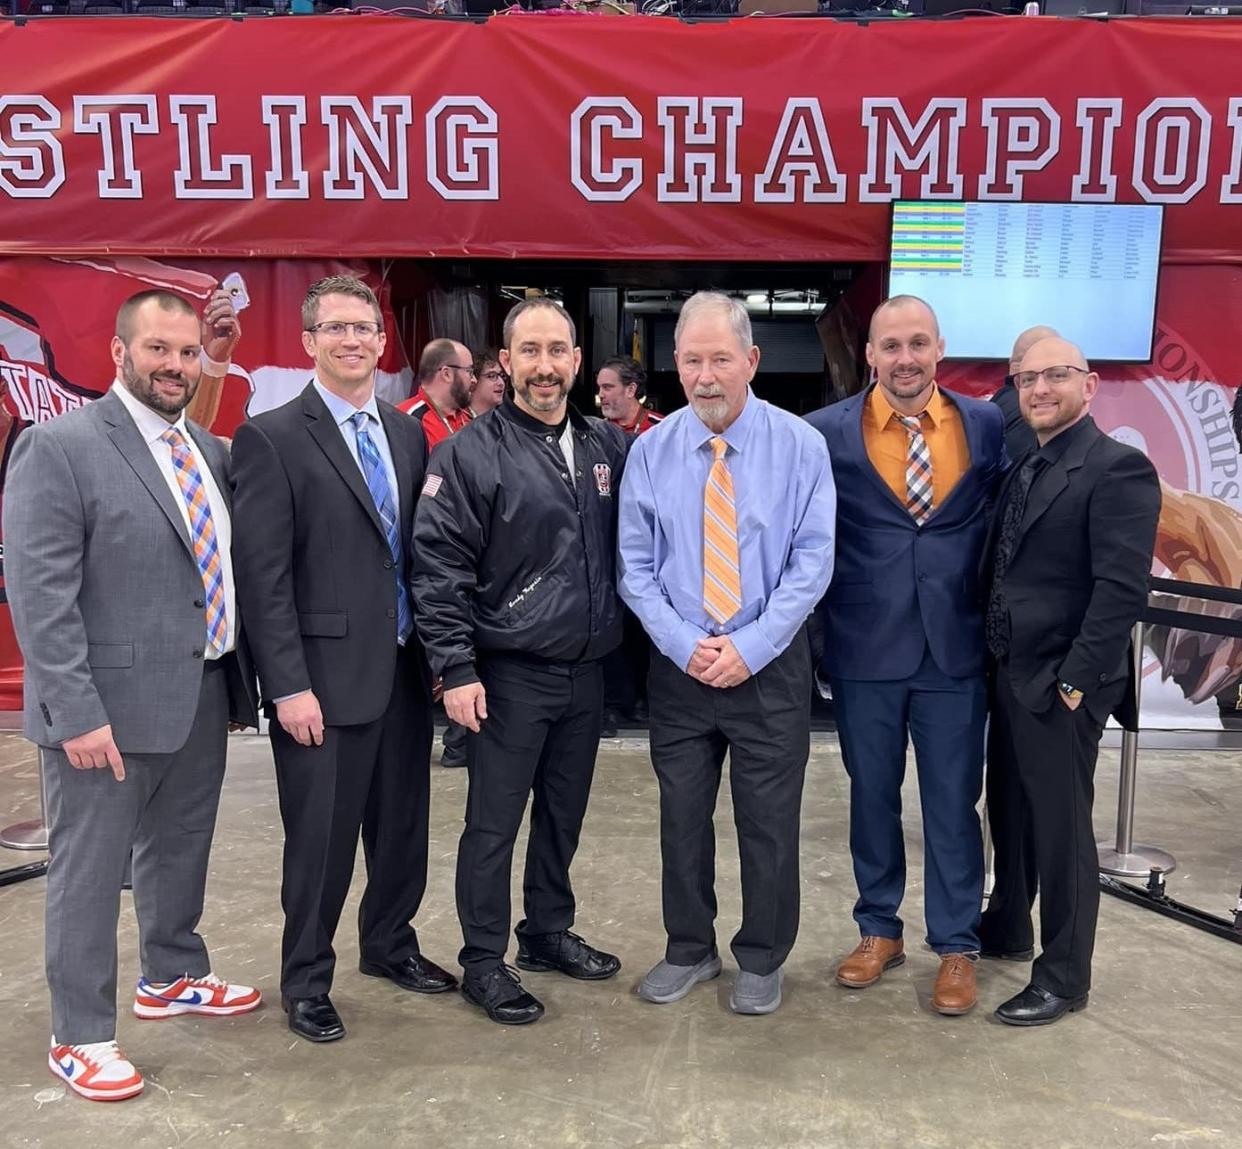 Jim Wegesin, in blue shirt, poses after the Hall of Fame ceremony with five of his former wrestlers at Galion High School.
(L to R) Galion head coach Brent Tyrrell, Highland head coach Adam Gilmore, son Brady Wegesin, Galion athletic director and assistant coach Matt Tyrrell, and Jeremiah Webber, head coach at Dublin Coffman.